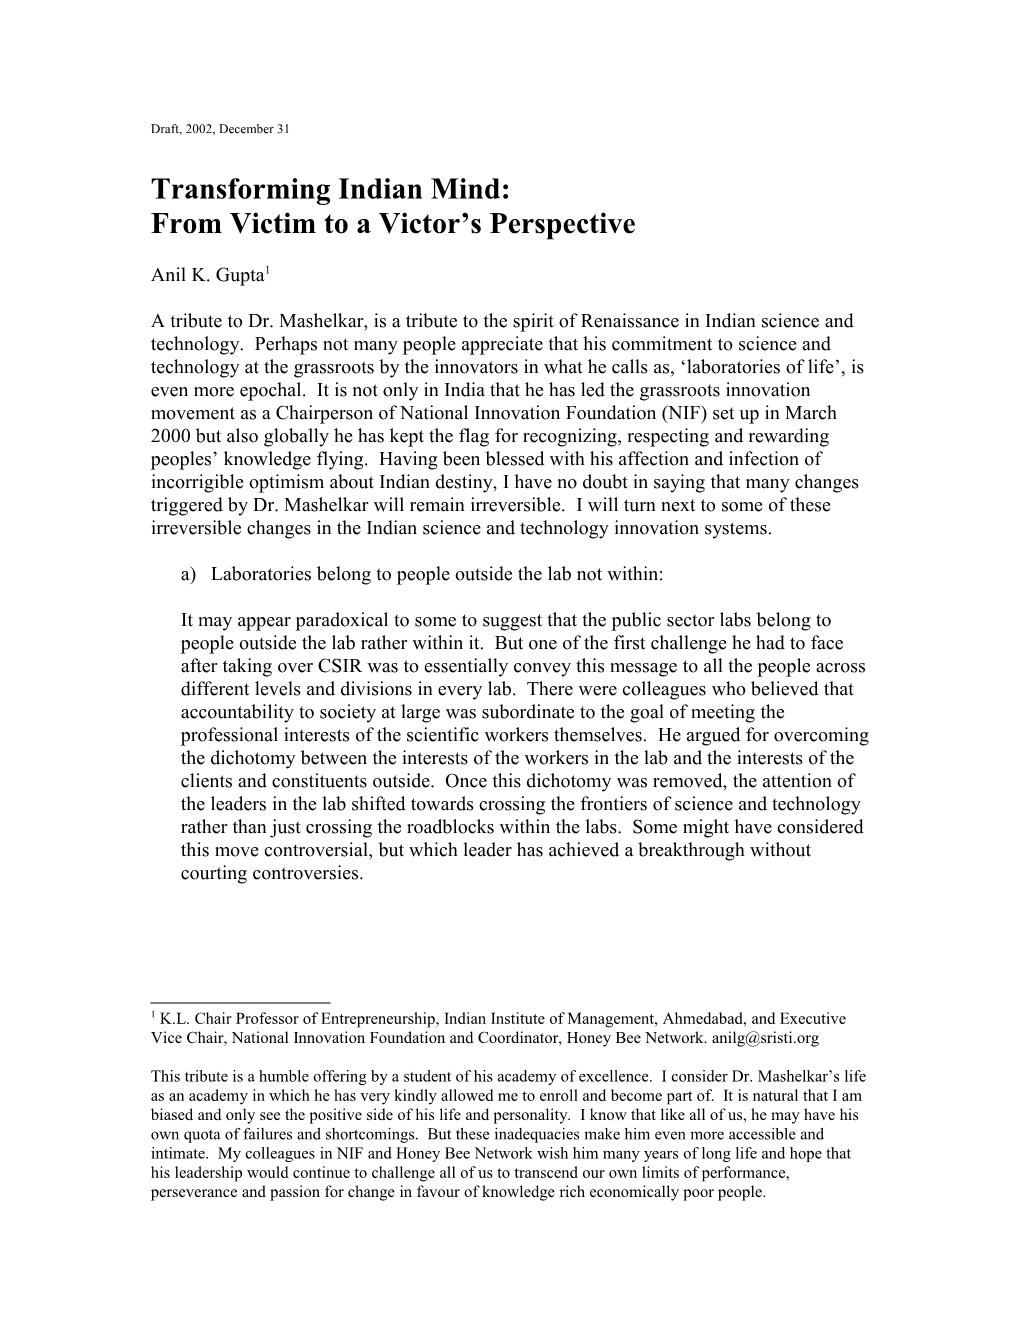 Transforming Indian Mind: from Victim to a Victor S Perspective